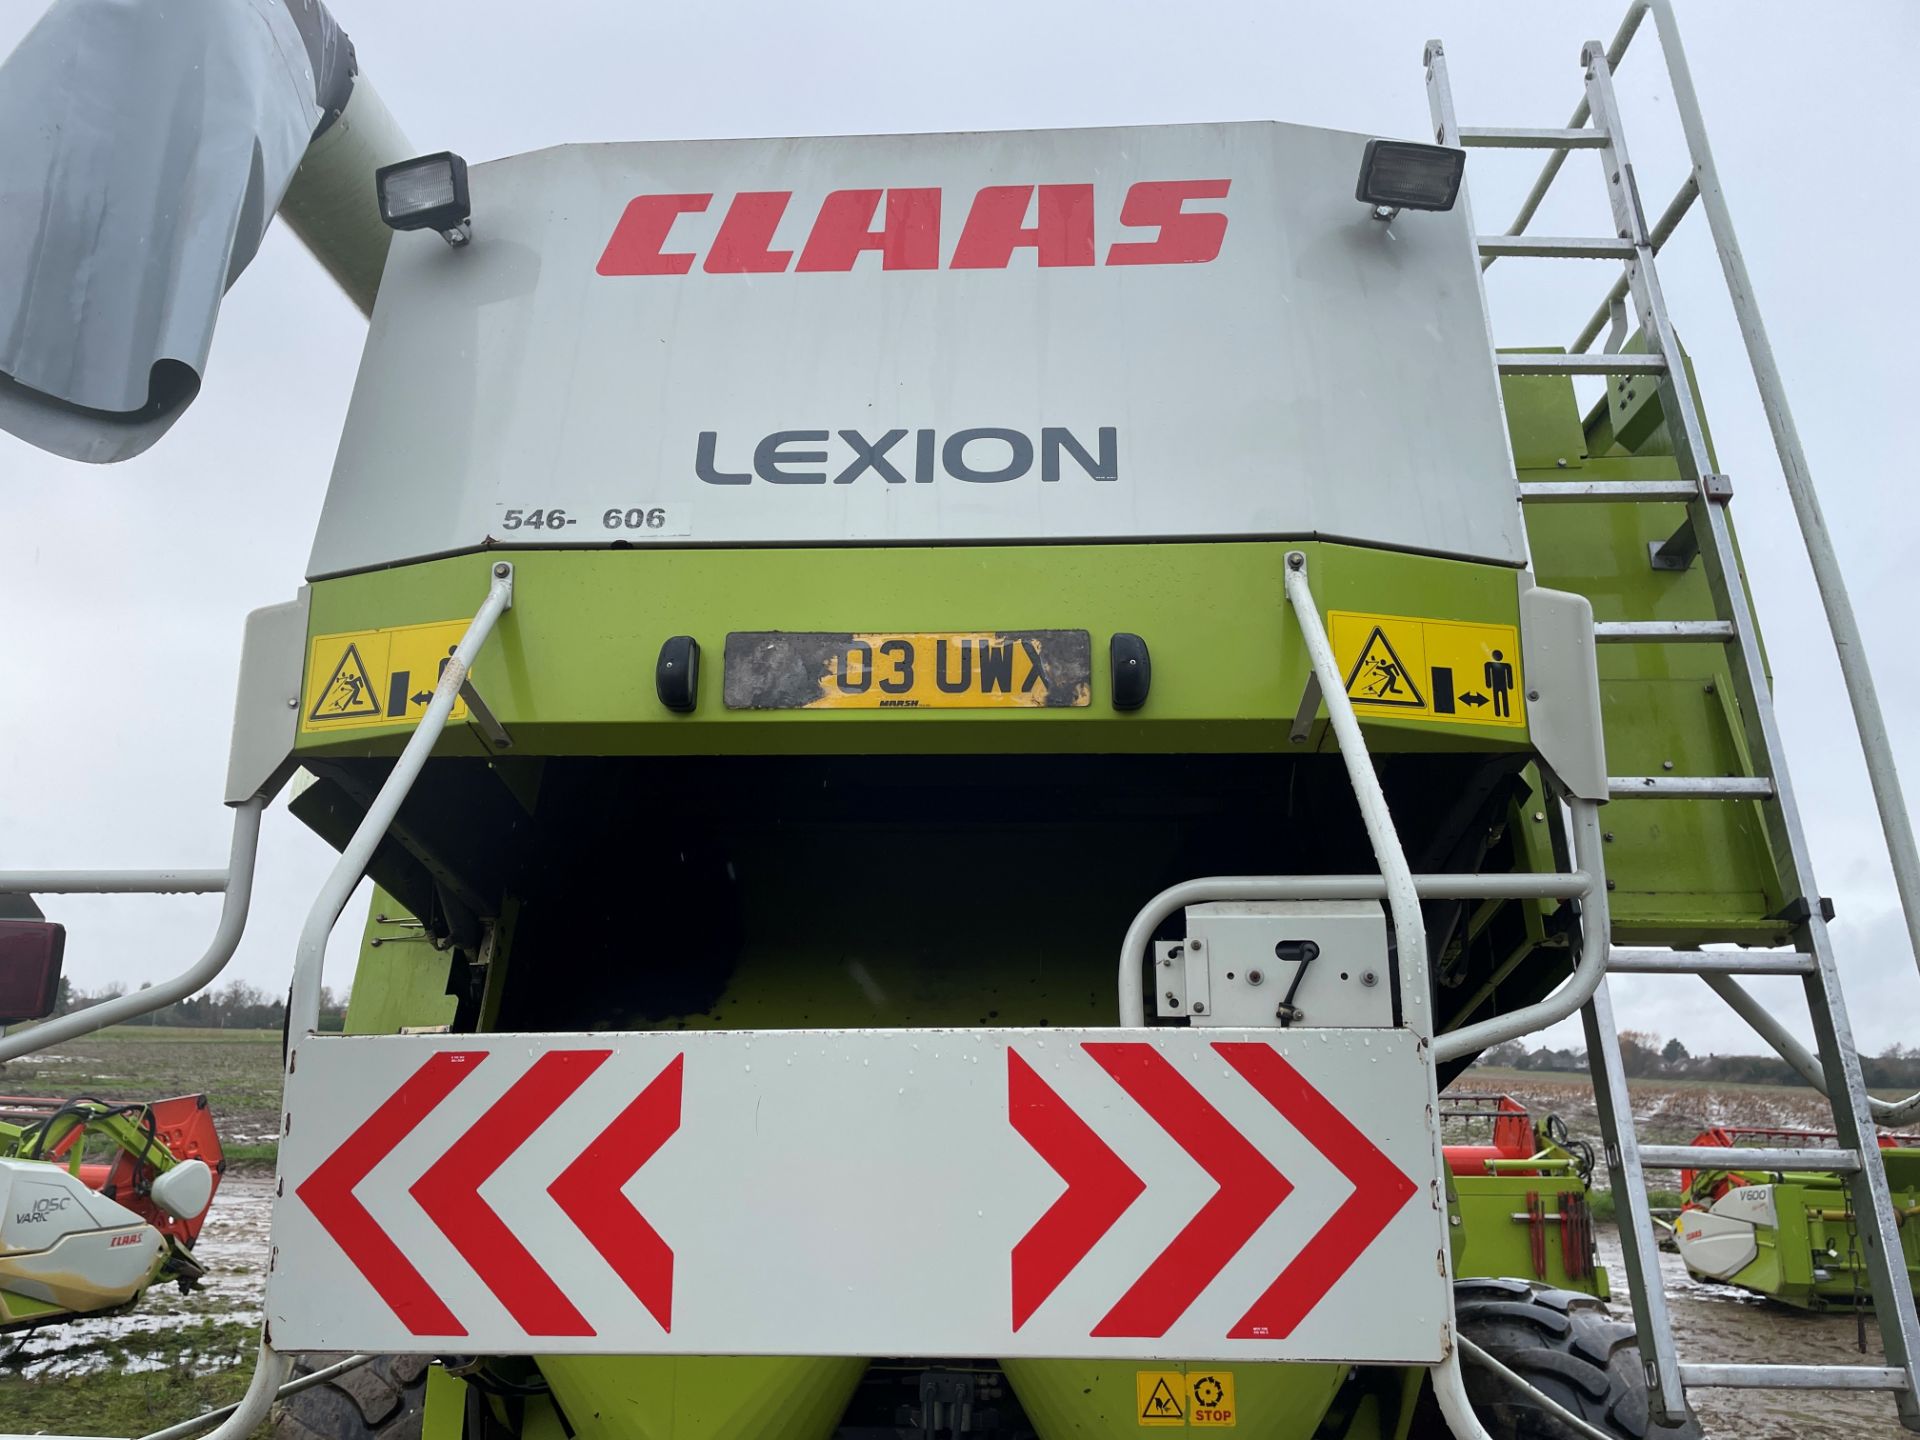 (03) Claas Lexion 480 Evolution combine harvester 750 7.5m Autocontour cutterbar with trolley, - Image 3 of 3